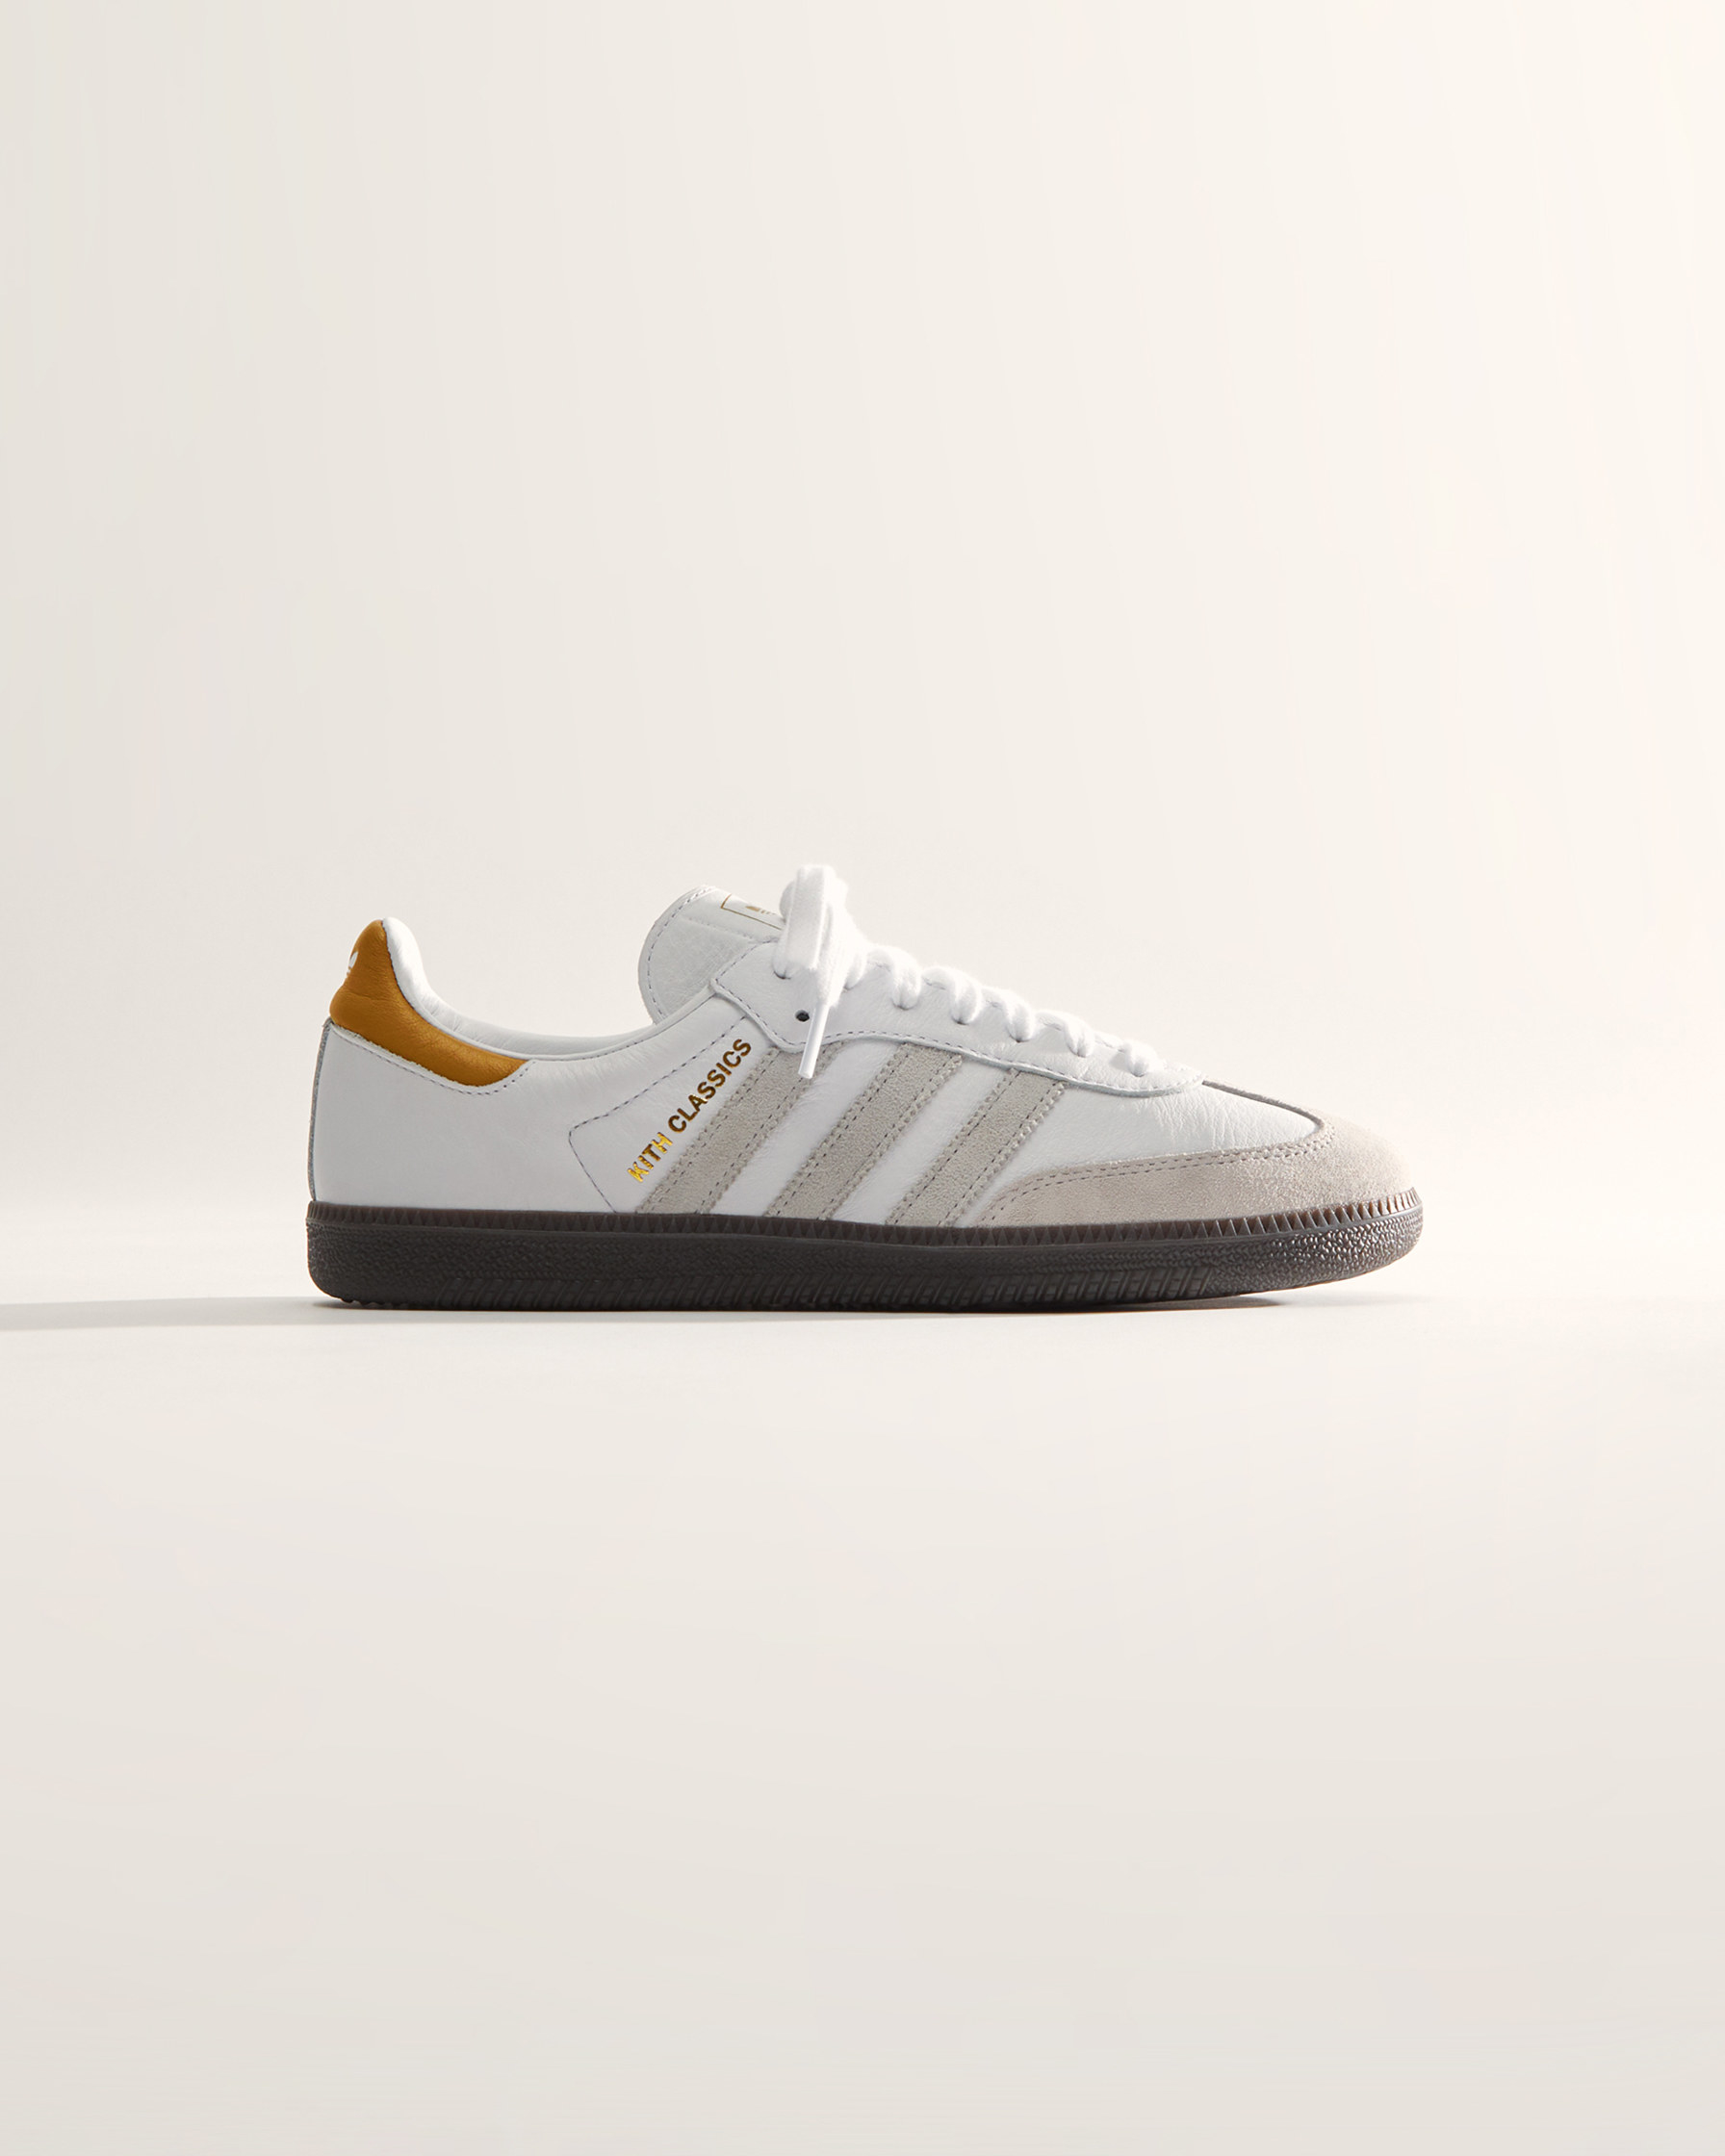 New Kith Classics & Adidas Collab for Summer | Complex